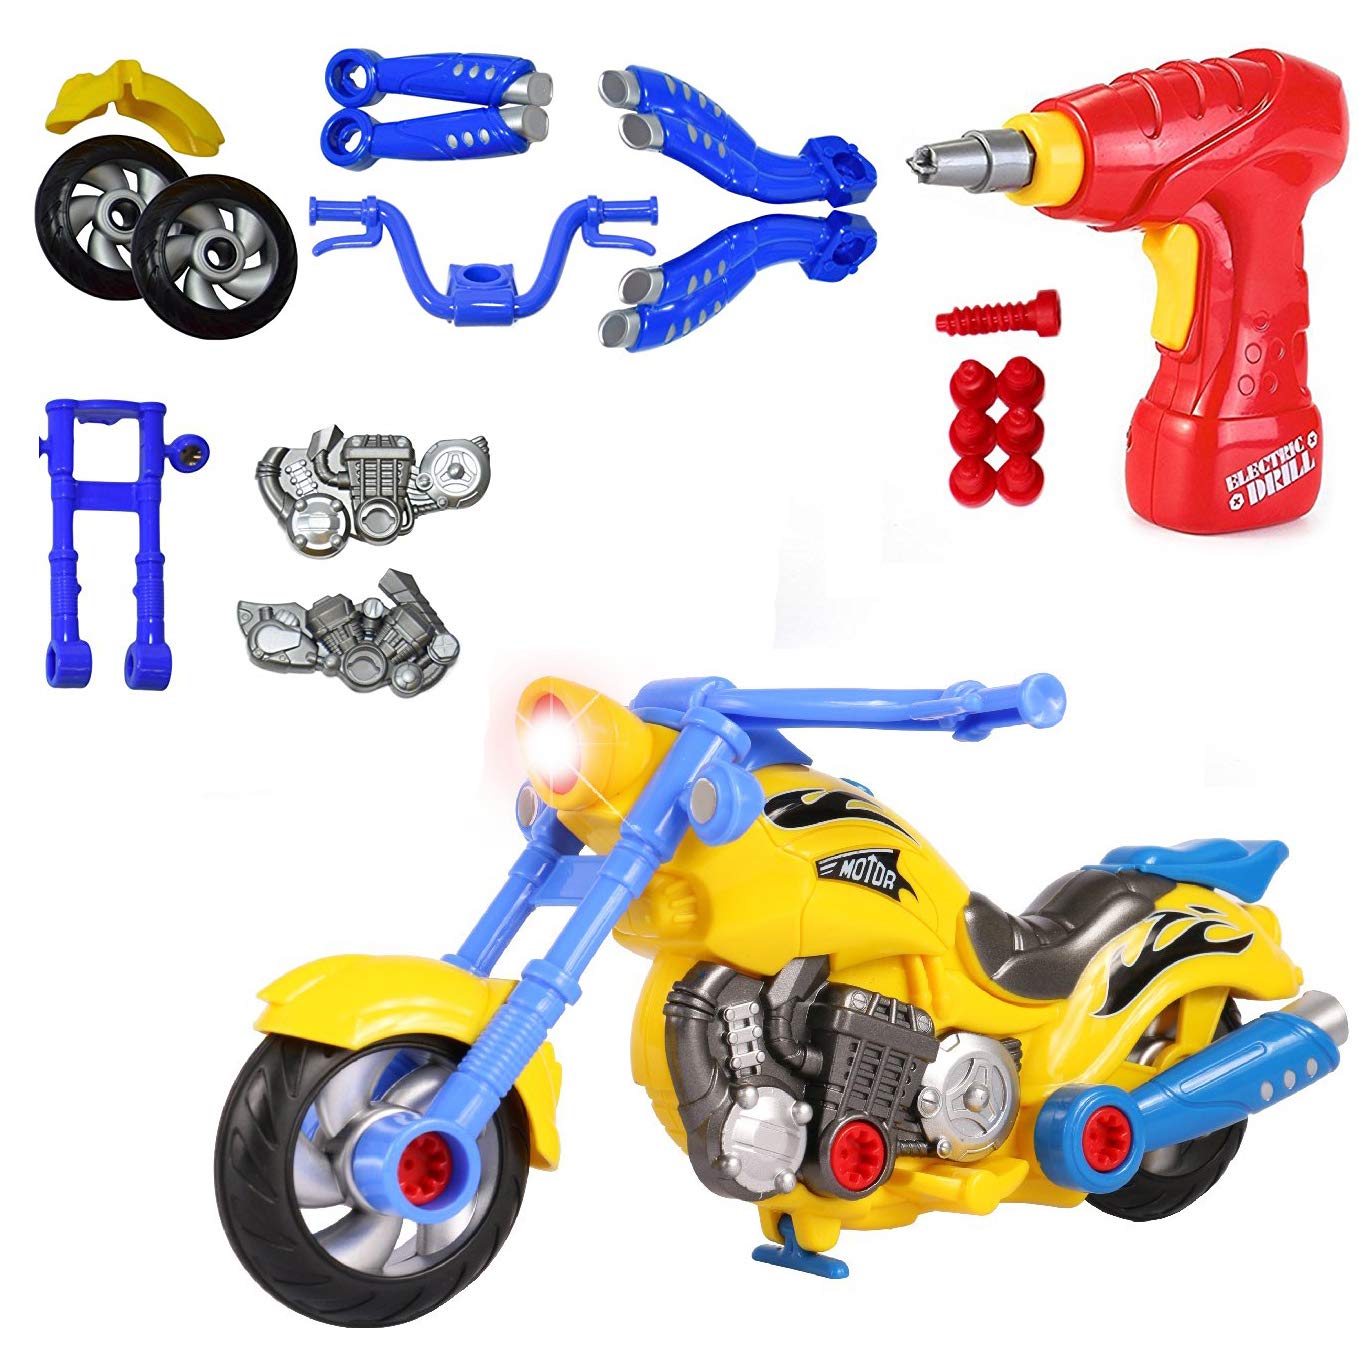 Kids Take Apart Toys | Build Your Own Toy Motorcycle Vehicle Construction Playset | Realistic Sounds & Lights with Tools and Power Drill (Motorcycle)